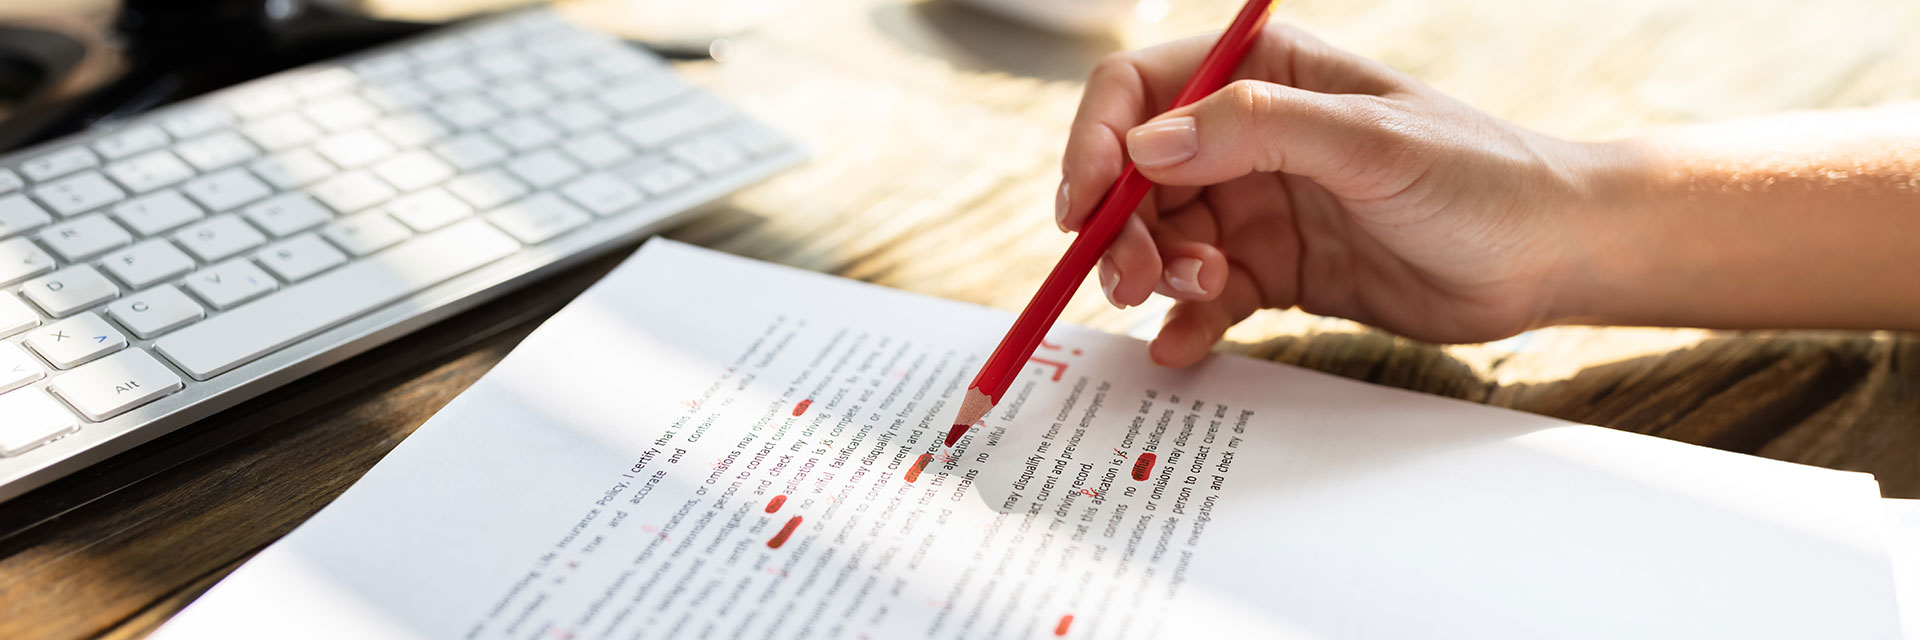 closeup of editor's hand marking up a manuscript in red pen